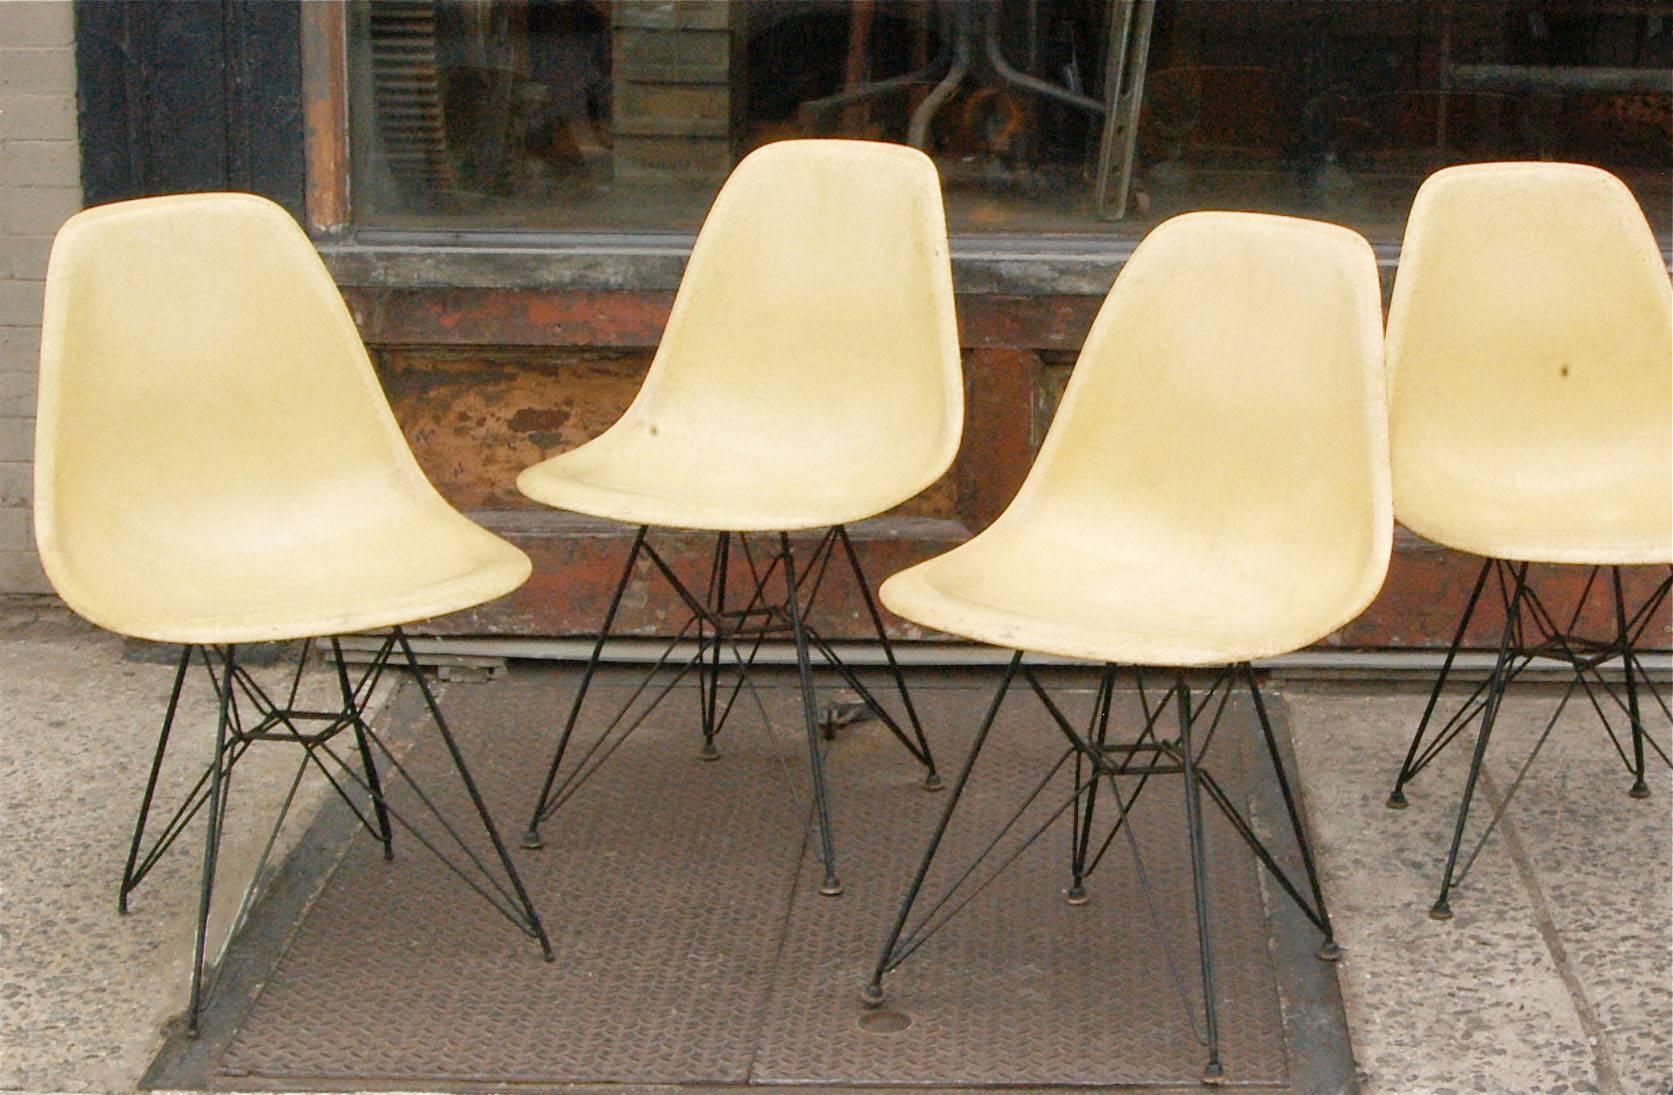 Set of four, vintage, yellow, Eames for Herman Miller moulded fiberglass side chairs with Eiffel Tower steel bases.